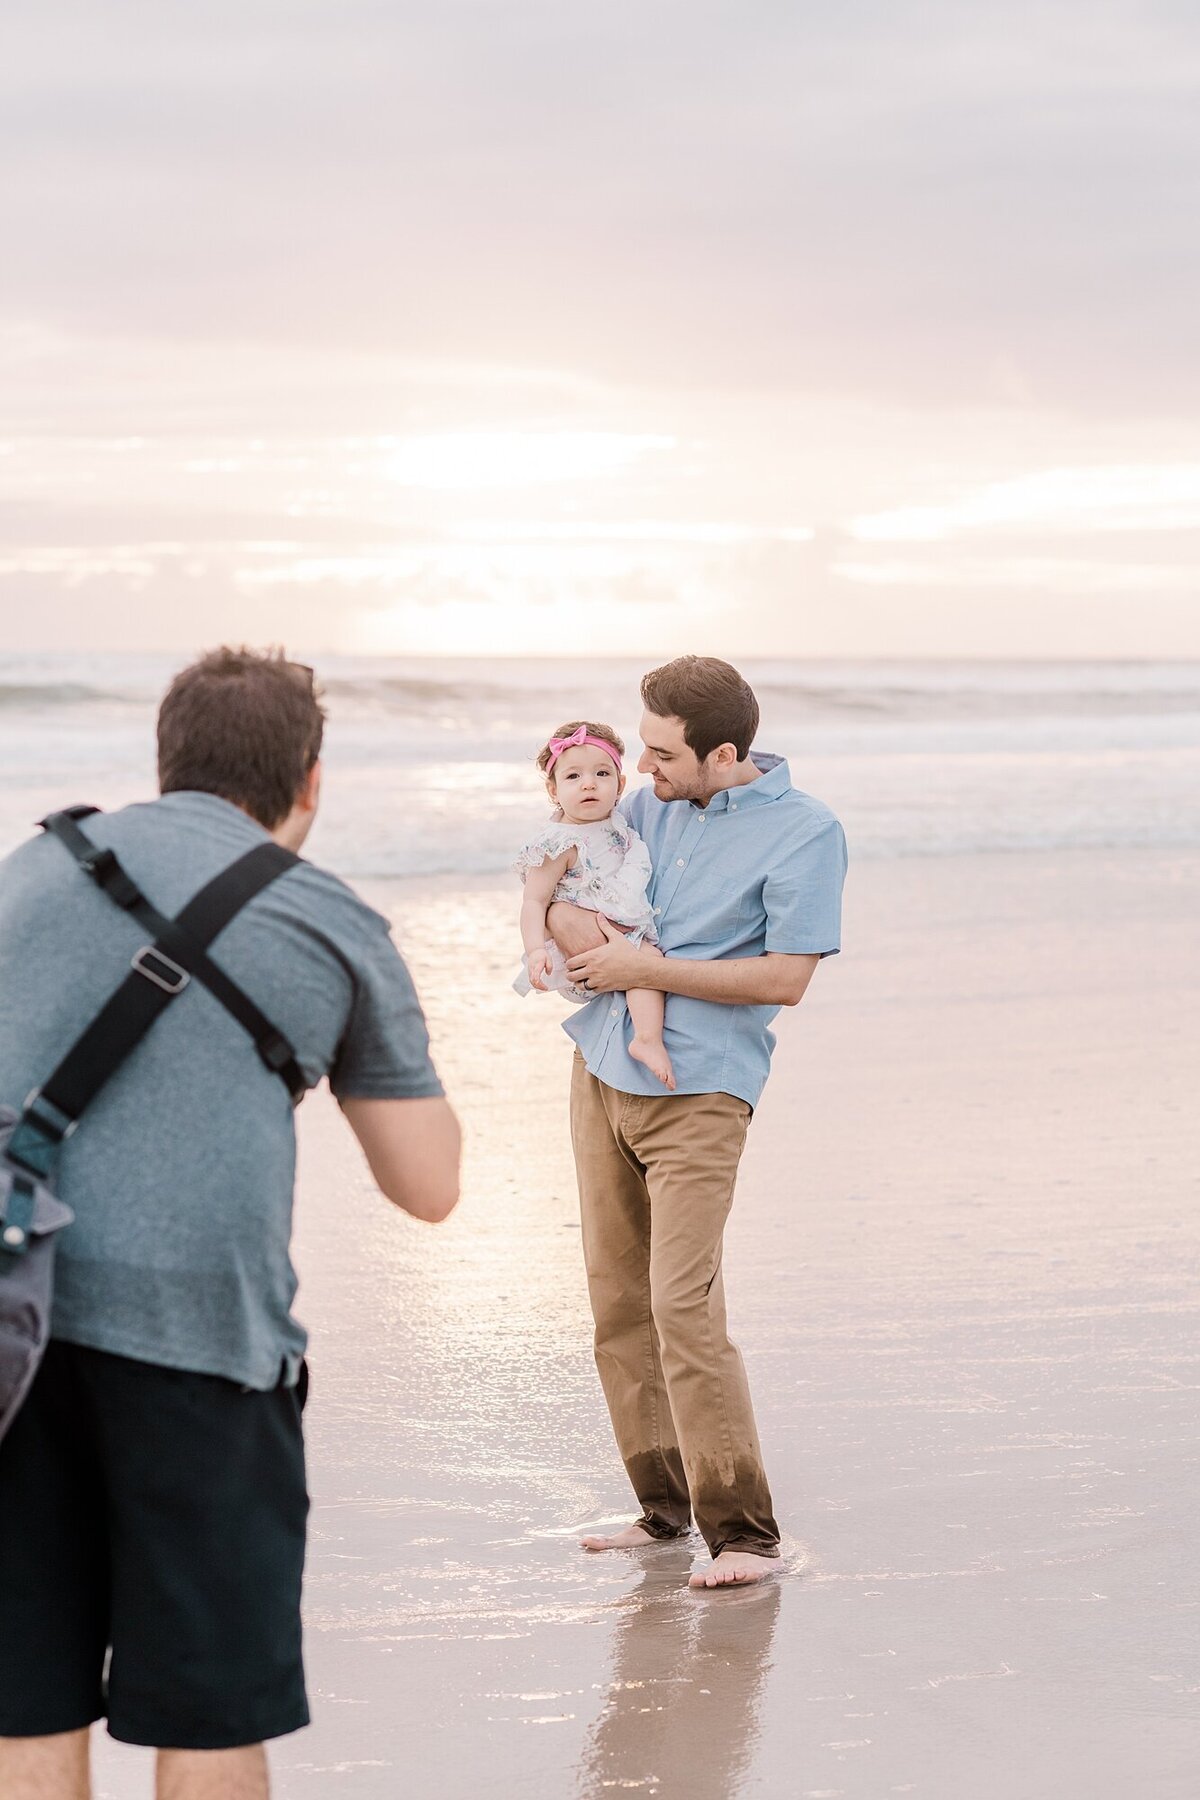 A father in a blue shirt and khakis holds his daughter on a beach while a photographer in a blue shirt takes their photo